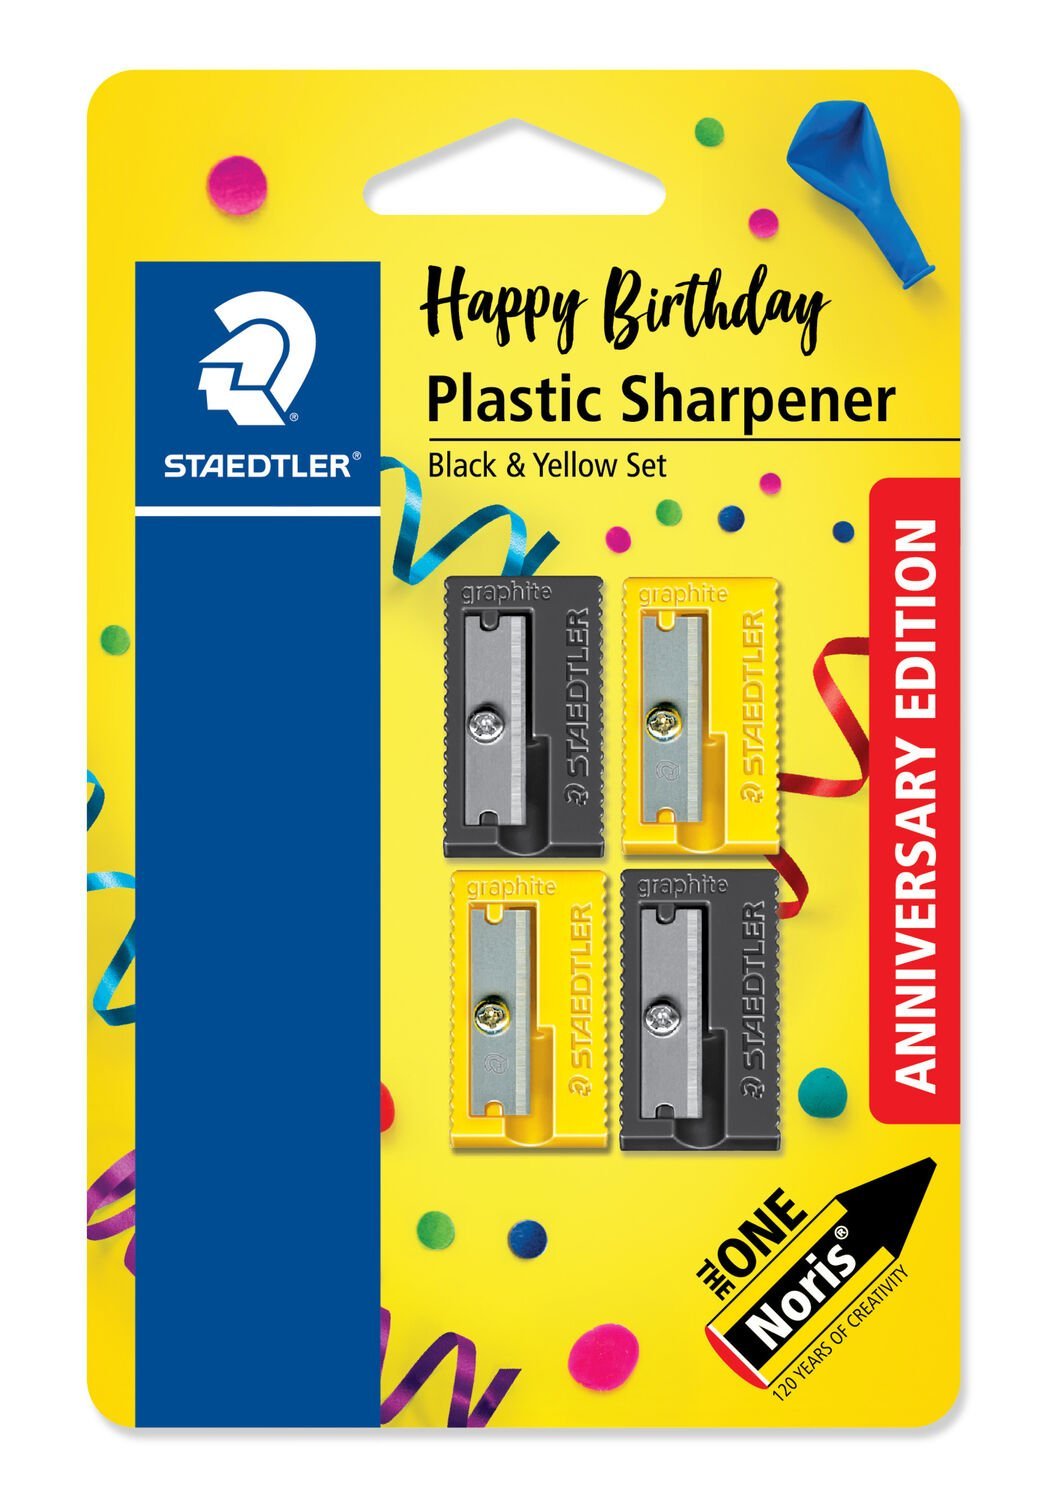 Blistercard containing 2 sharpeners in assorted colours - noris anniversary